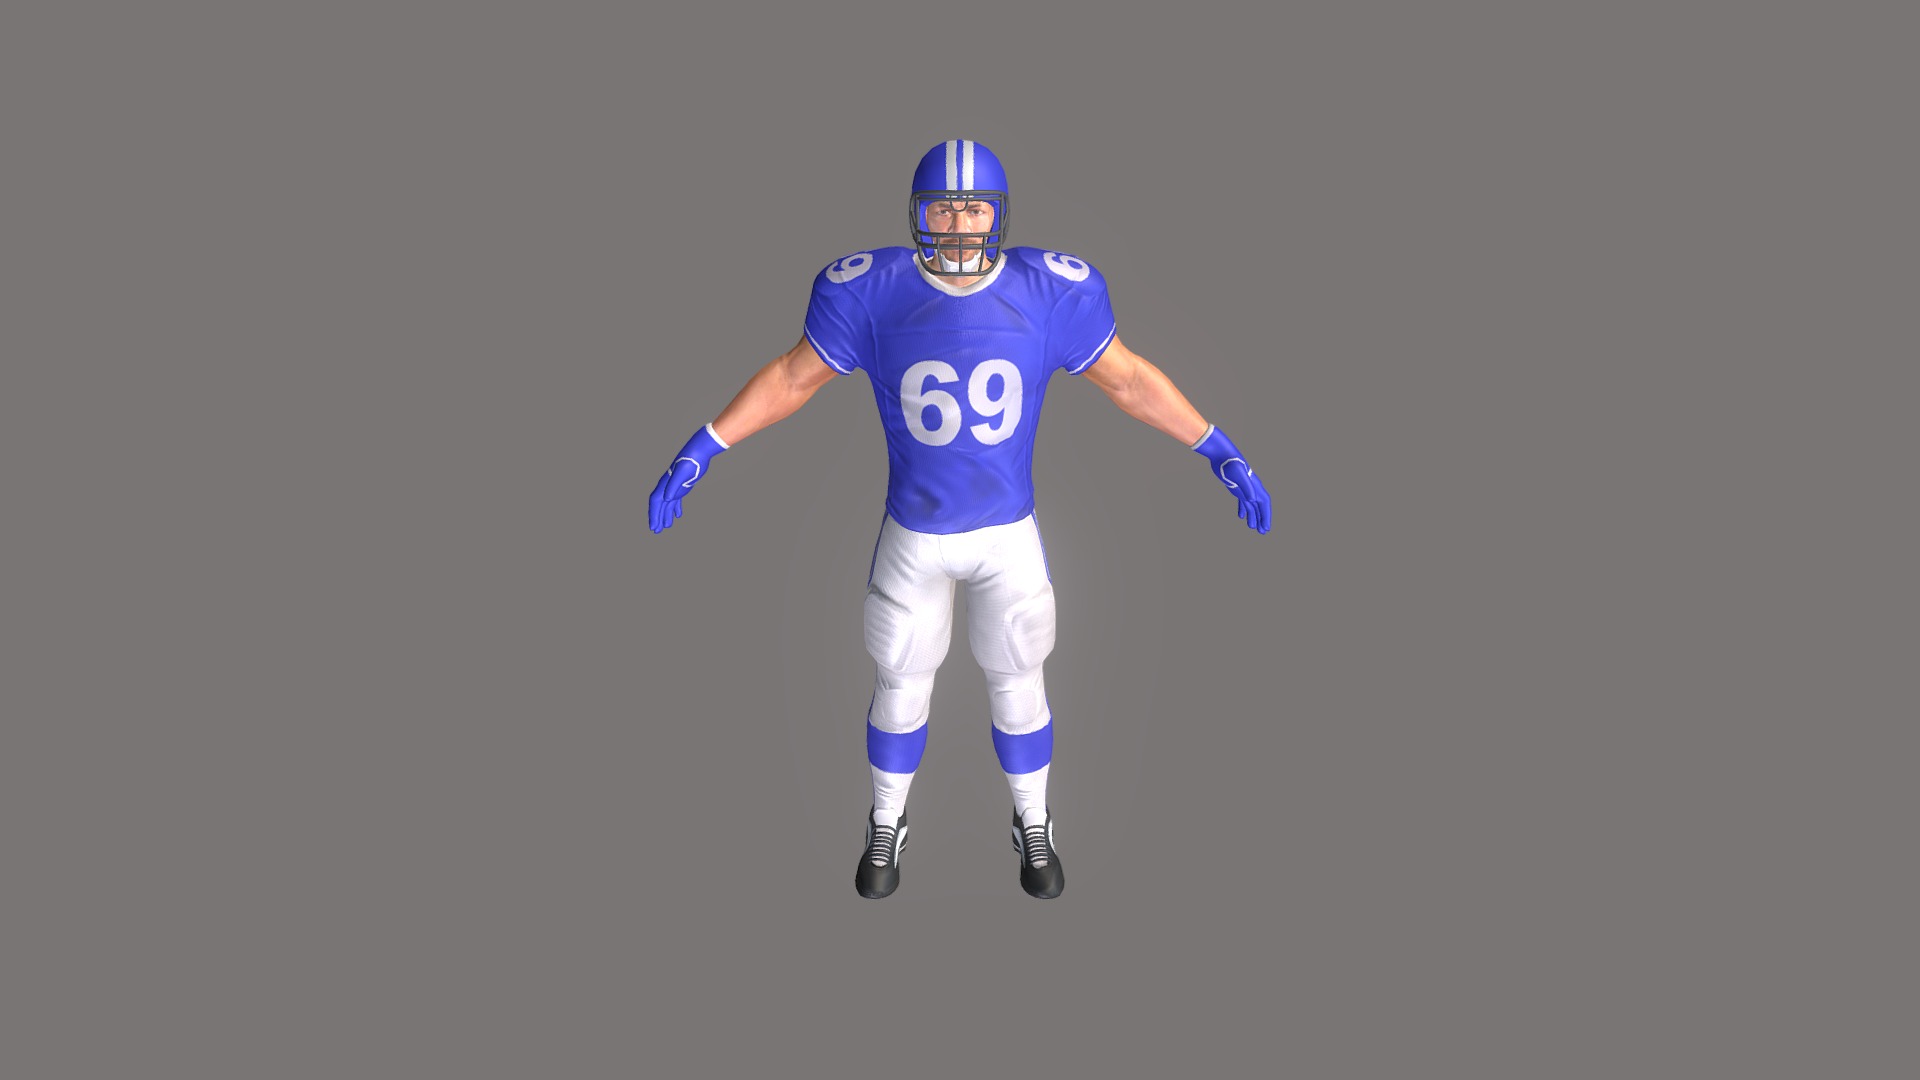 3D model American Footballer - This is a 3D model of the American Footballer. The 3D model is about a football player in a blue uniform.